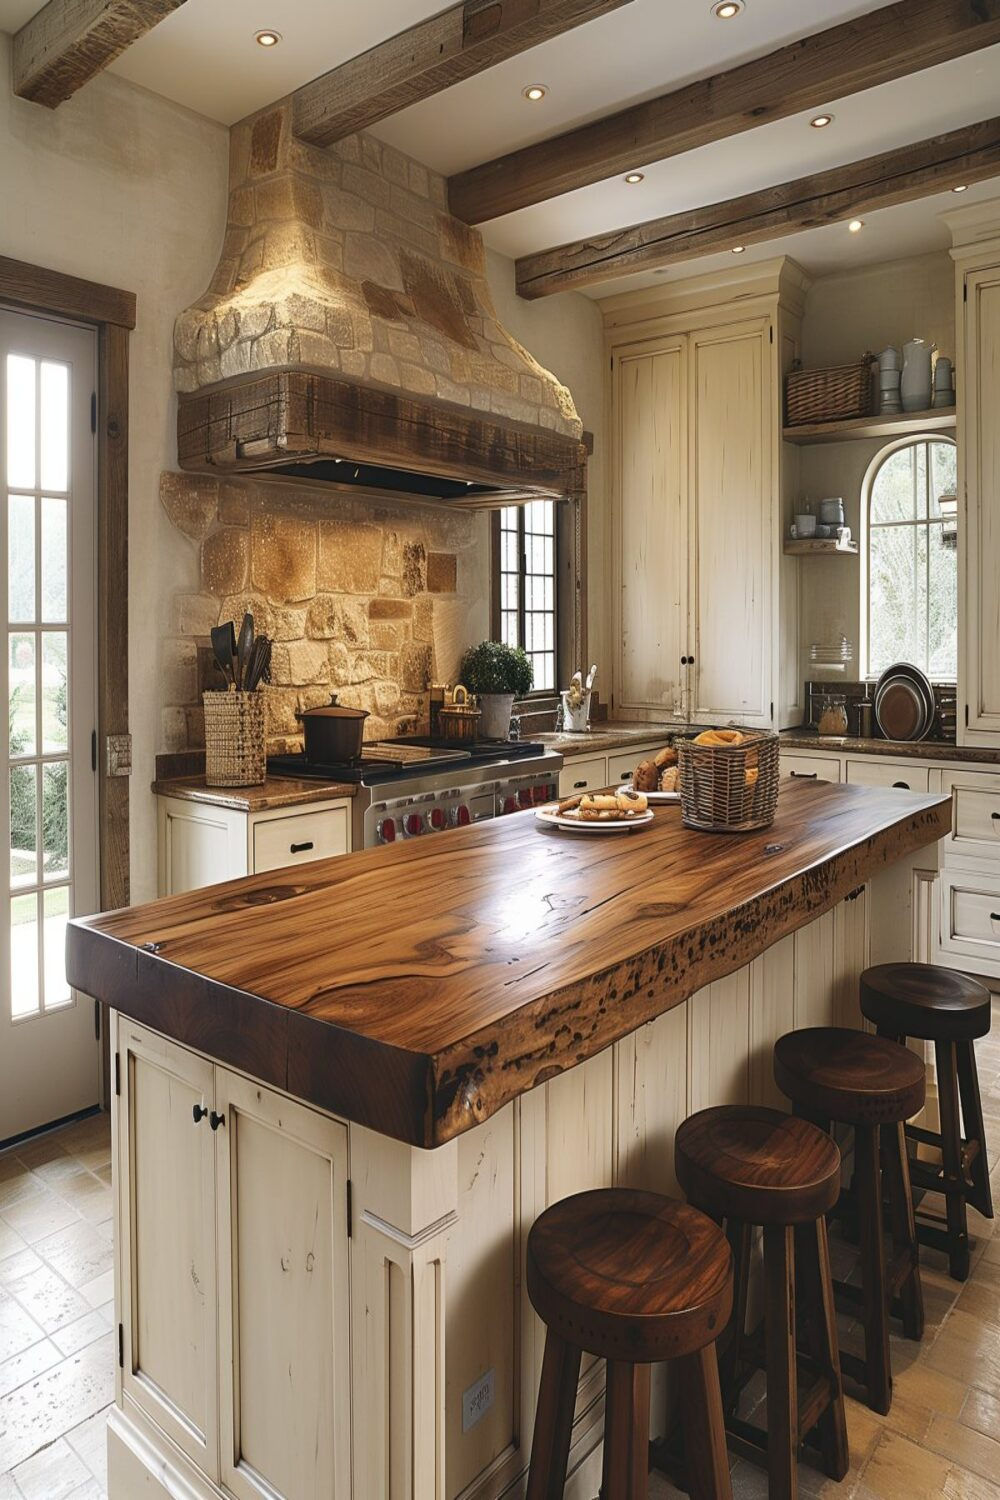 Charming Rustic Style Ideas for Your Country Kitchen